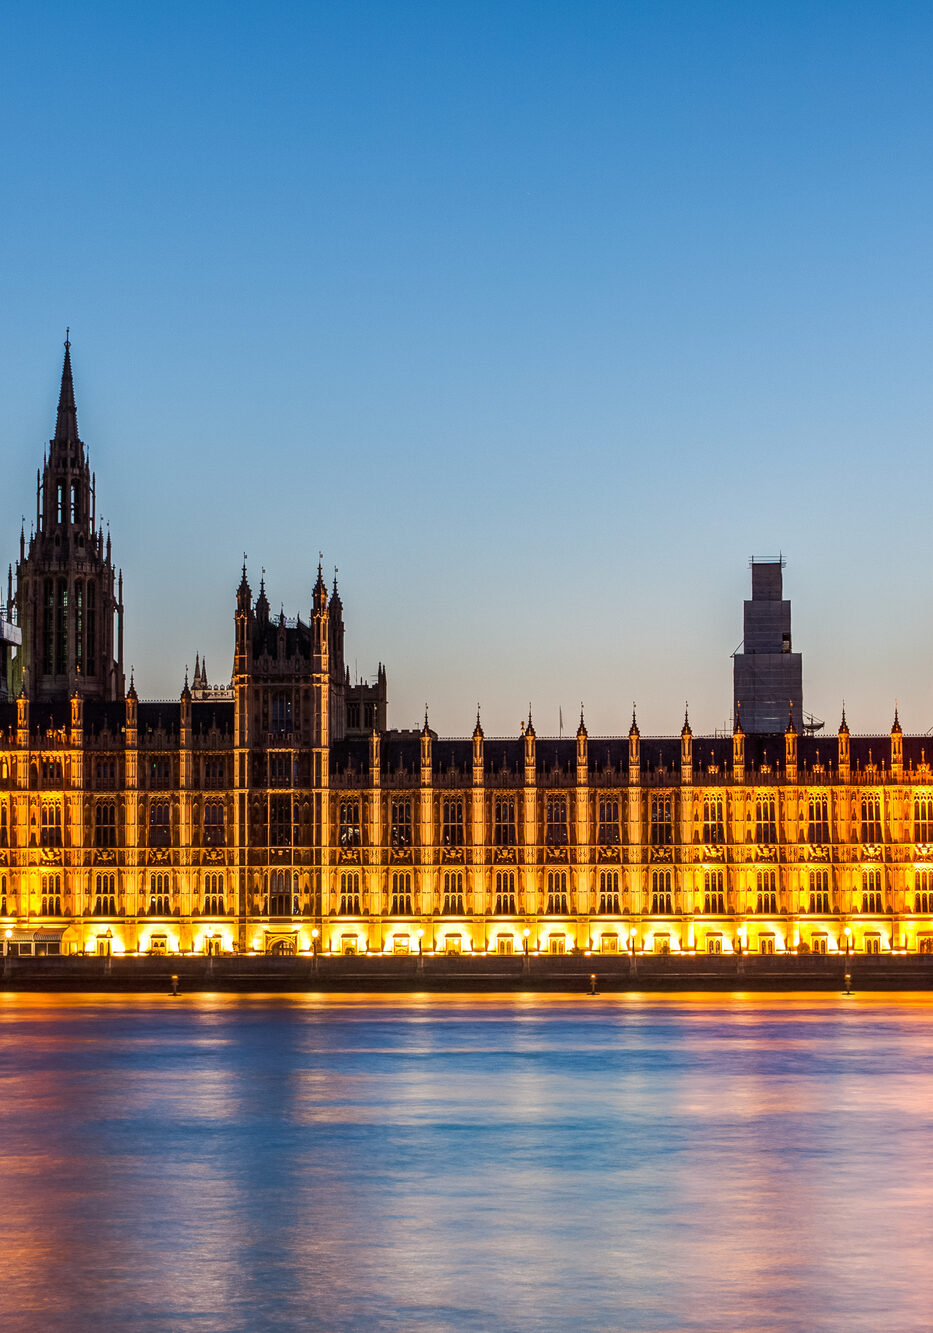 Night time photograph of the House of Lords from the river Thames